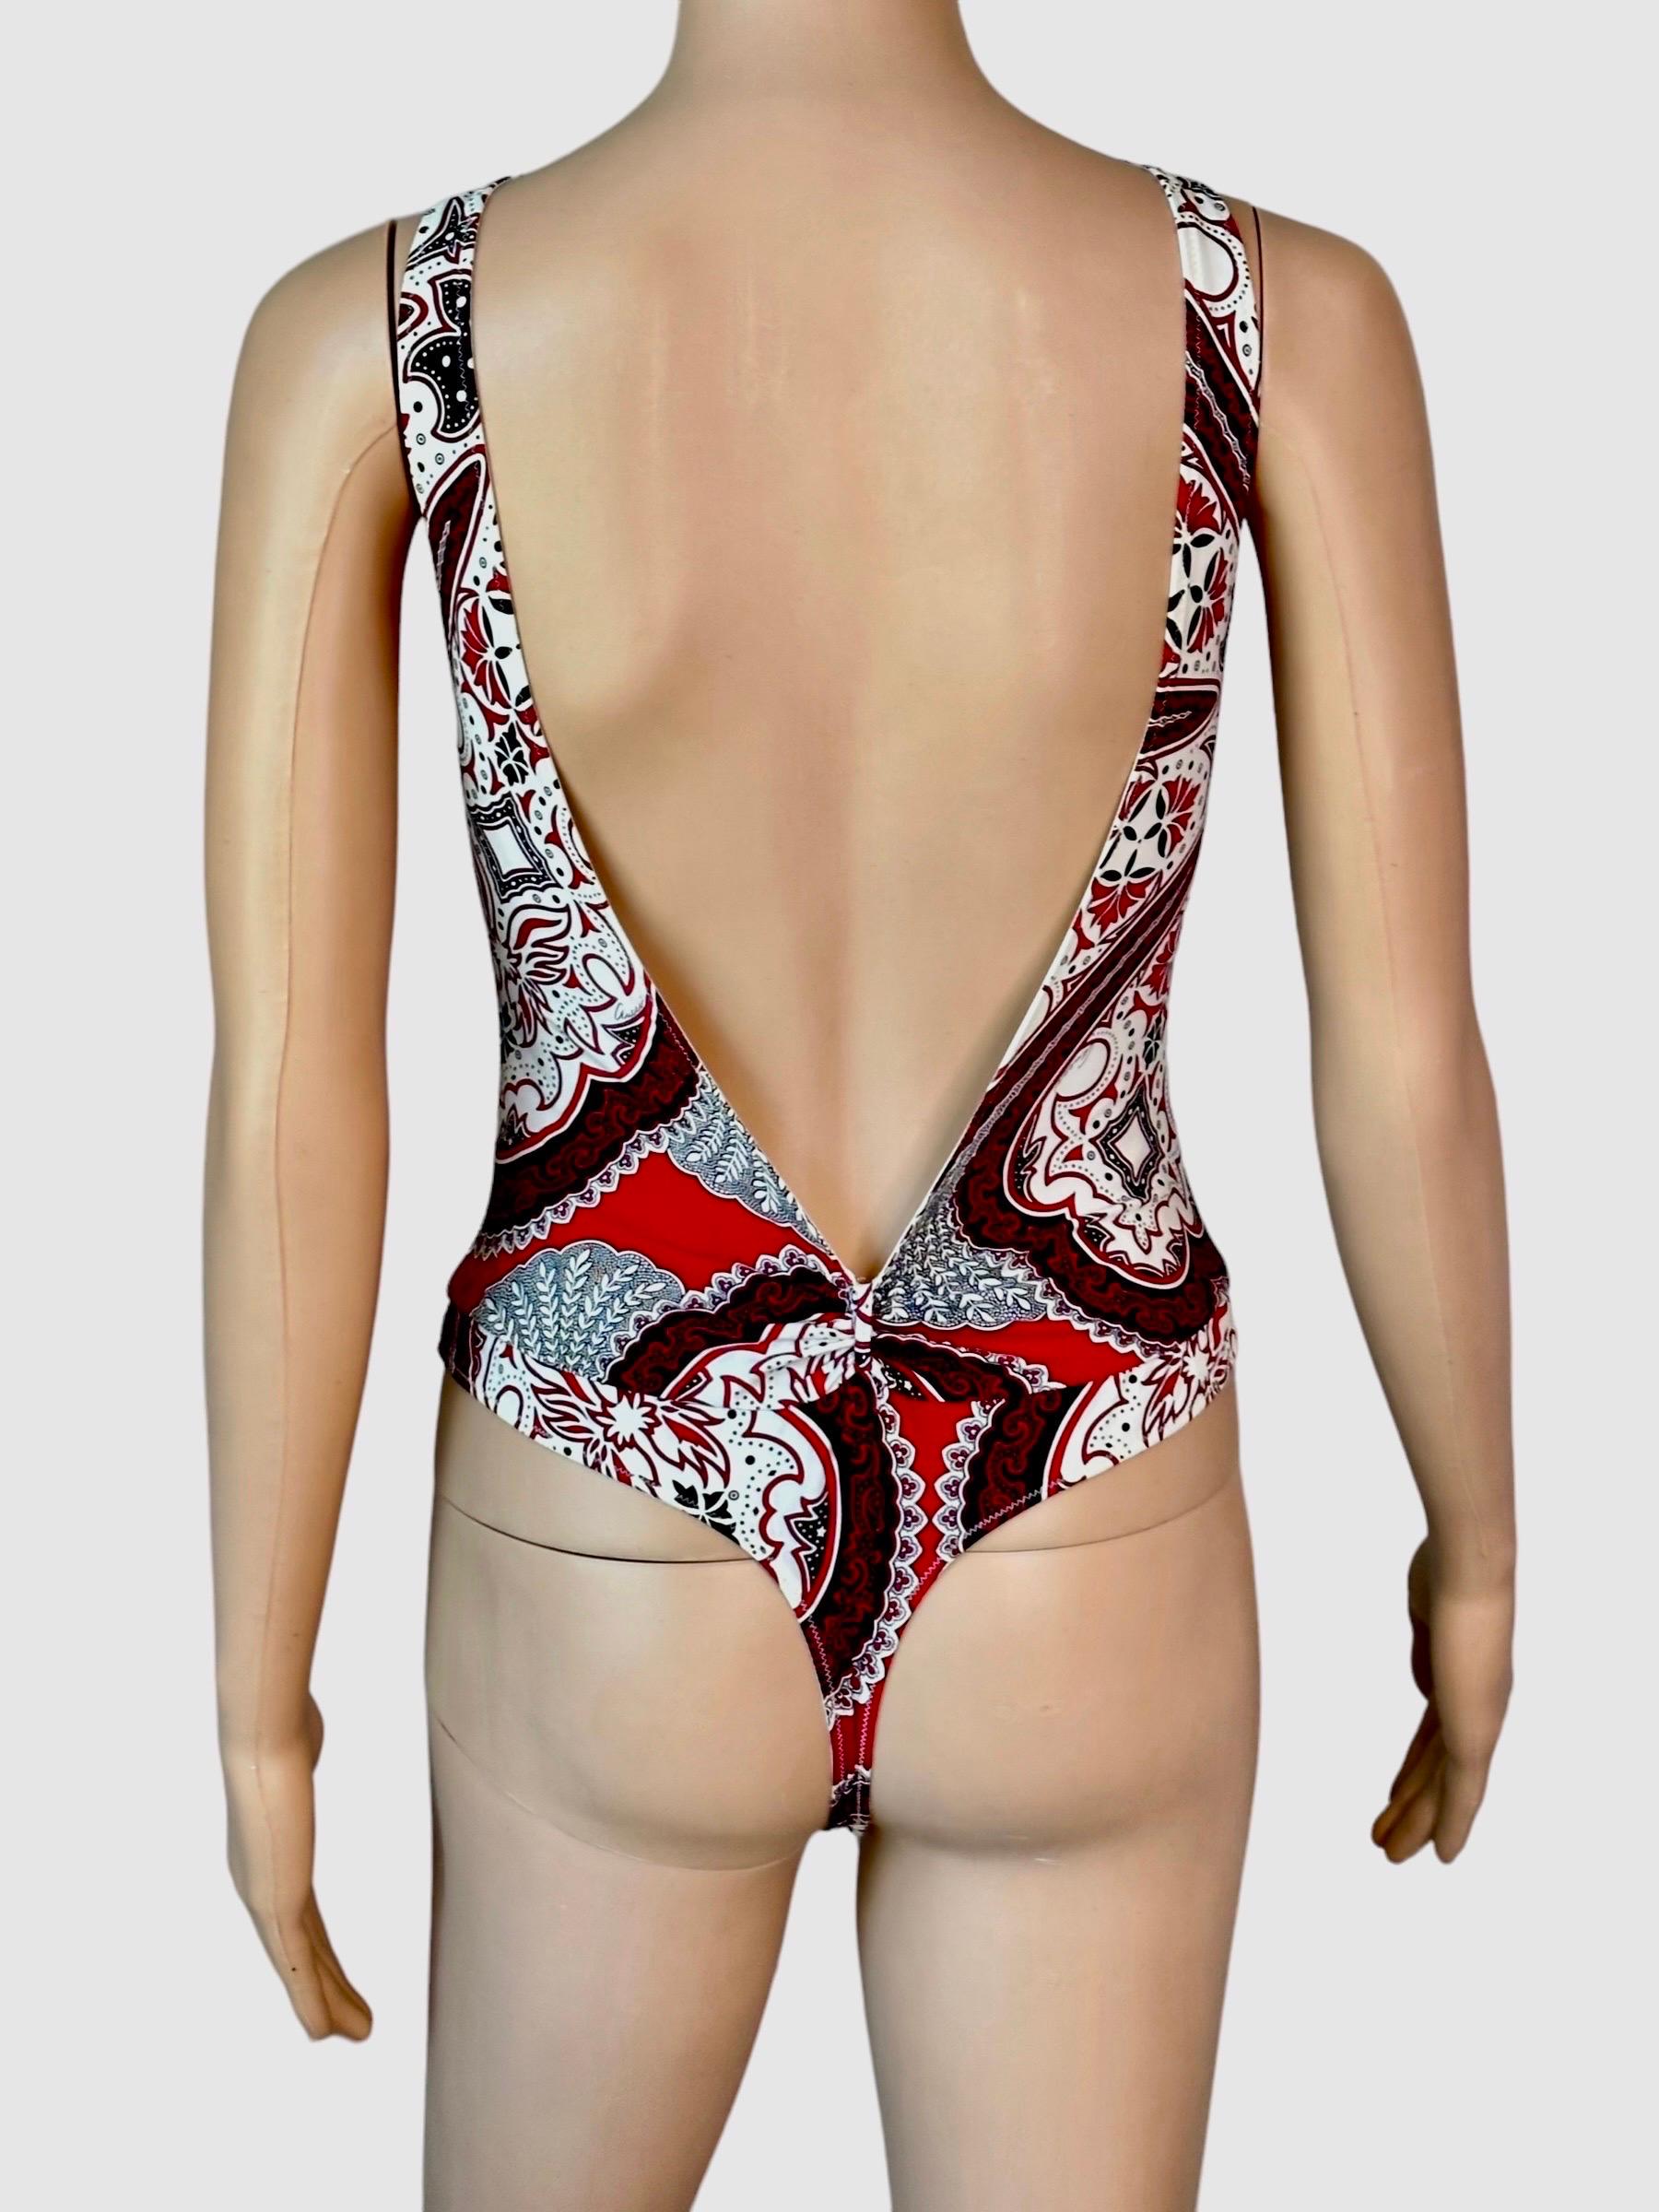 Tom Ford for Gucci Cruise 2004 Unworn One Piece Bodysuit Swimsuit Swimwear  In New Condition For Sale In Naples, FL